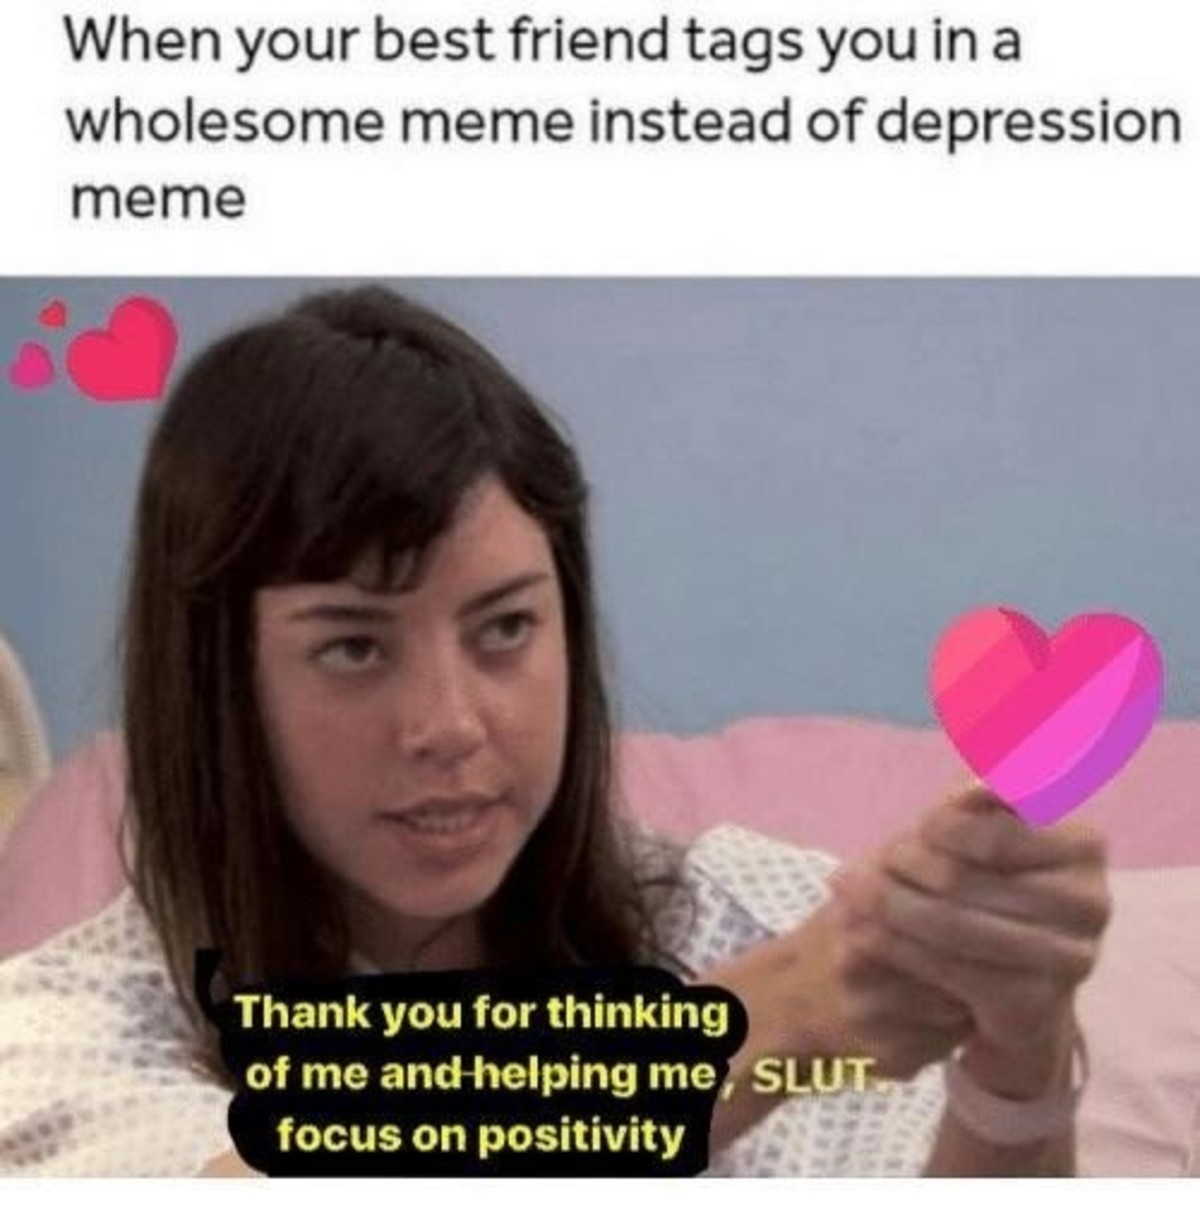 Wholesome gf memes